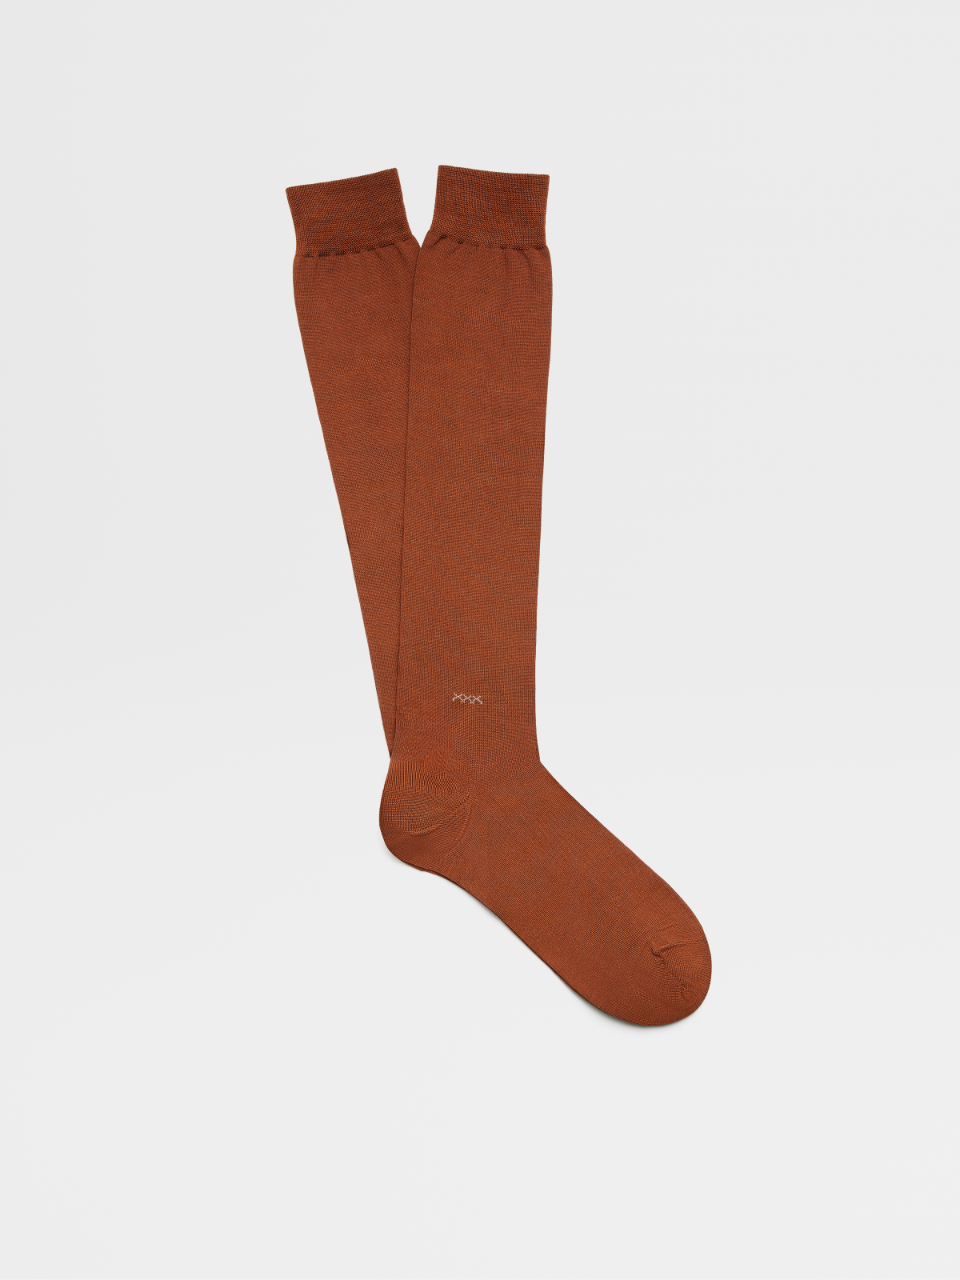 Vicuna Color Everyday Triple X Cotton Blend Mid Calf Socks